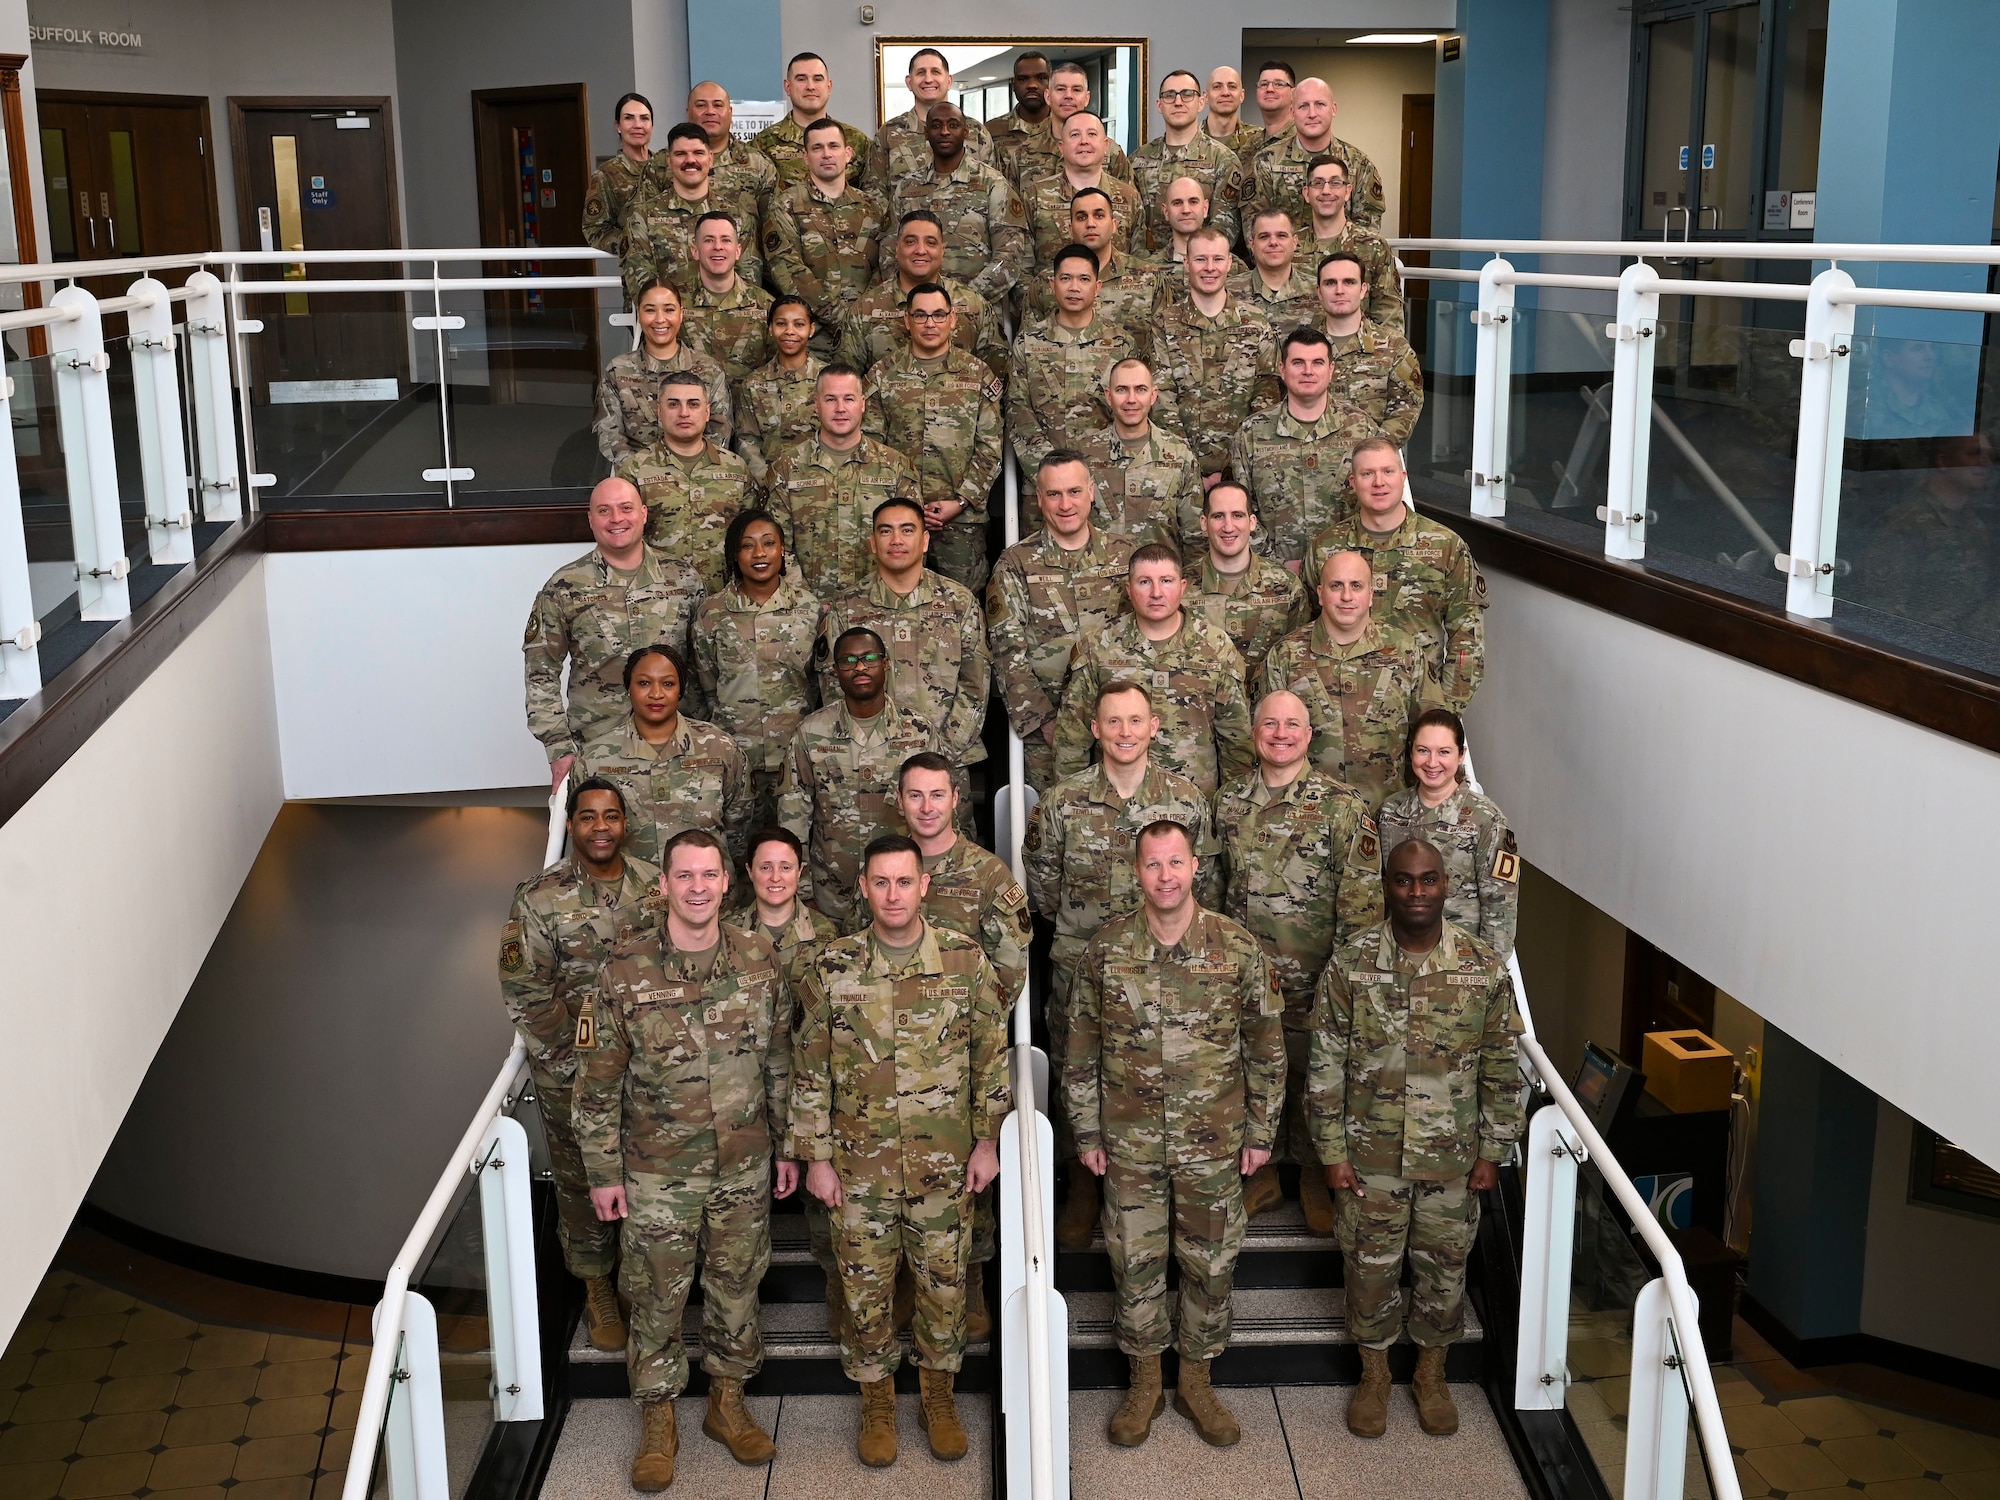 The Chief's Summit focuses on creating connections between enlisted leadership with the purpose to build and strengthen professional leadership within the Air Force.